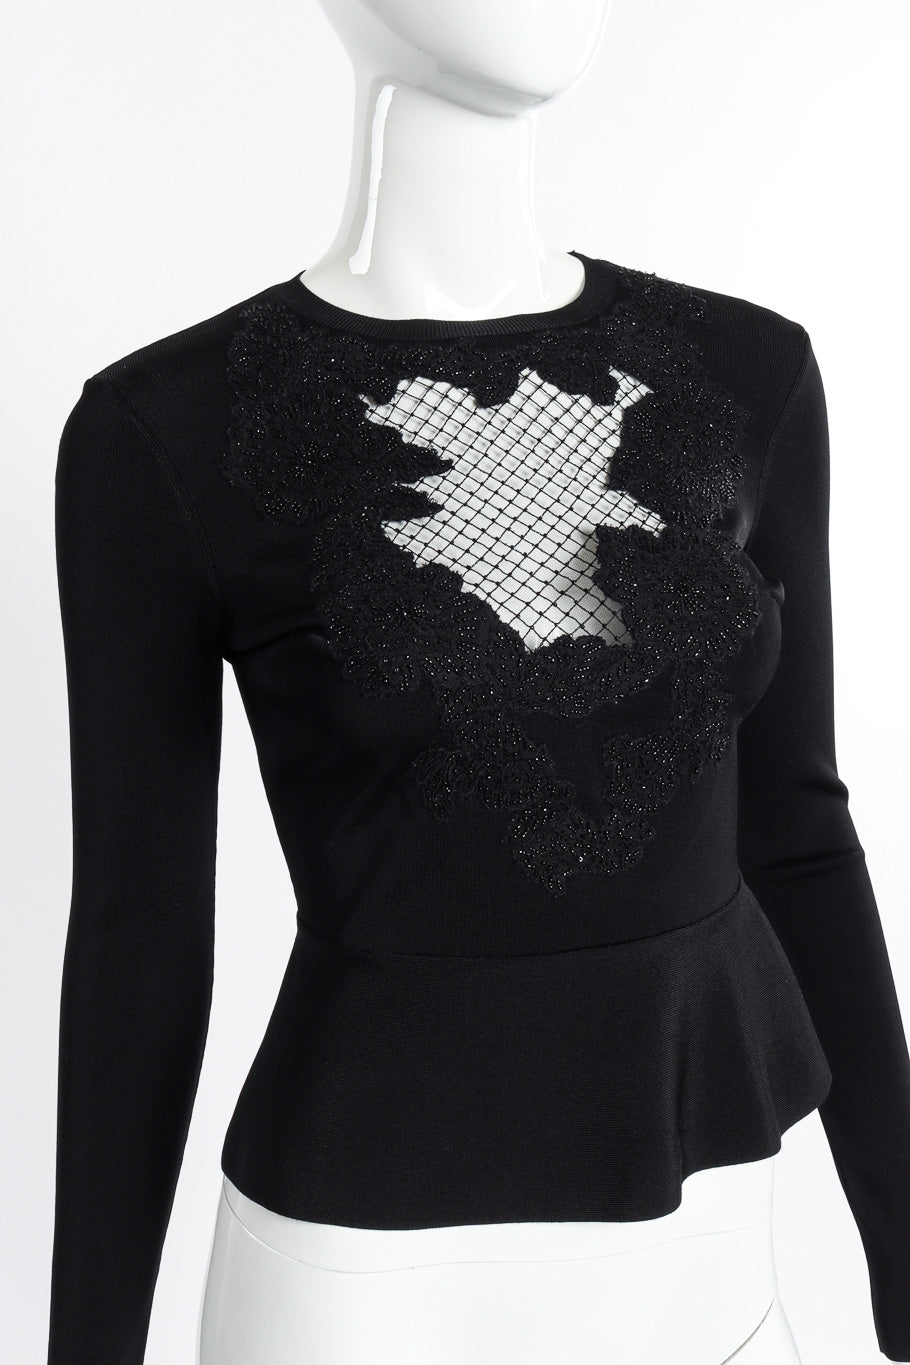 Valentino Beaded Fishnet Knit Top front on mannequin closeup @recessla